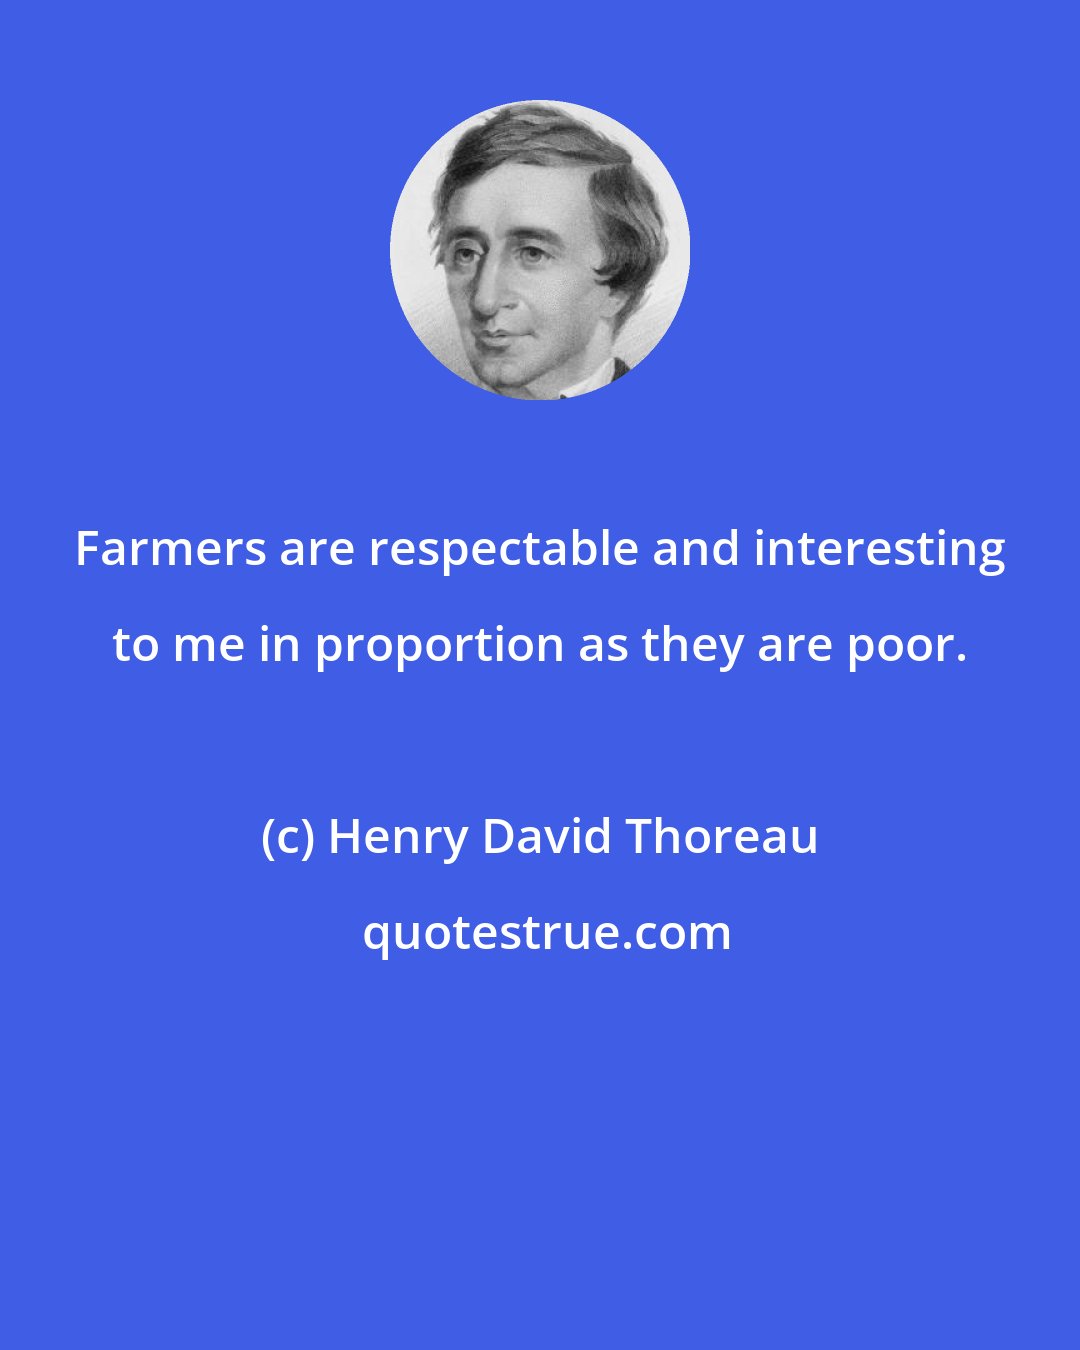 Henry David Thoreau: Farmers are respectable and interesting to me in proportion as they are poor.